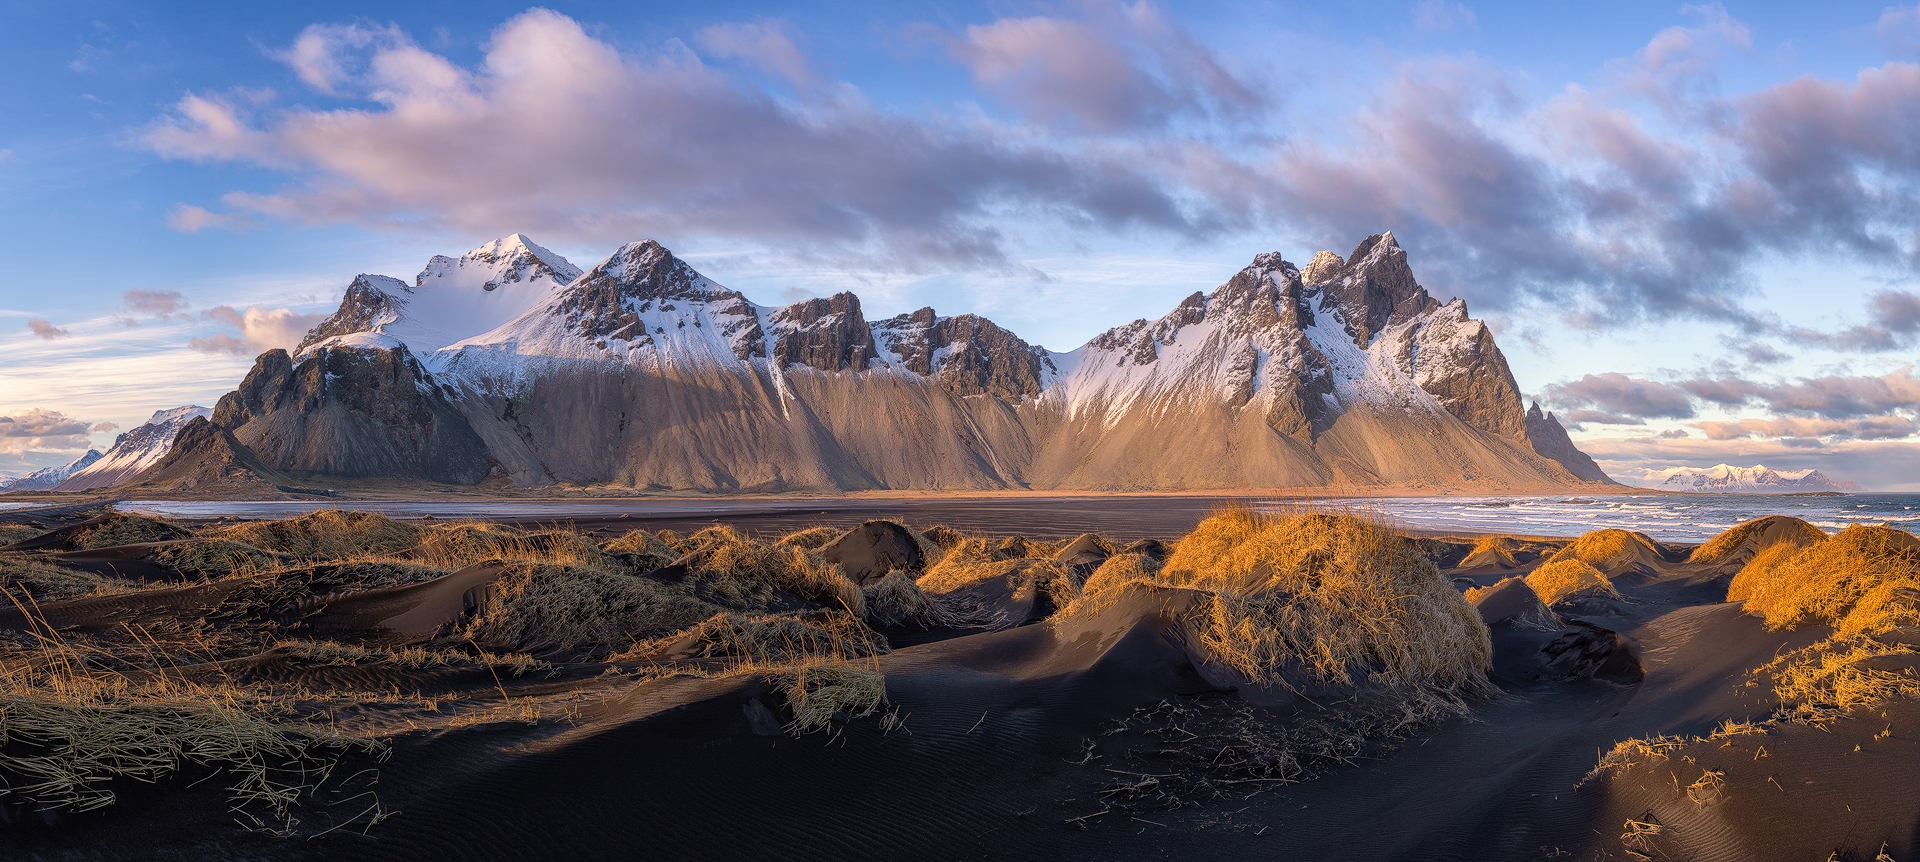 General 1920x862 landscape mountains snowy mountain Iceland beach nordic landscapes nature outdoors